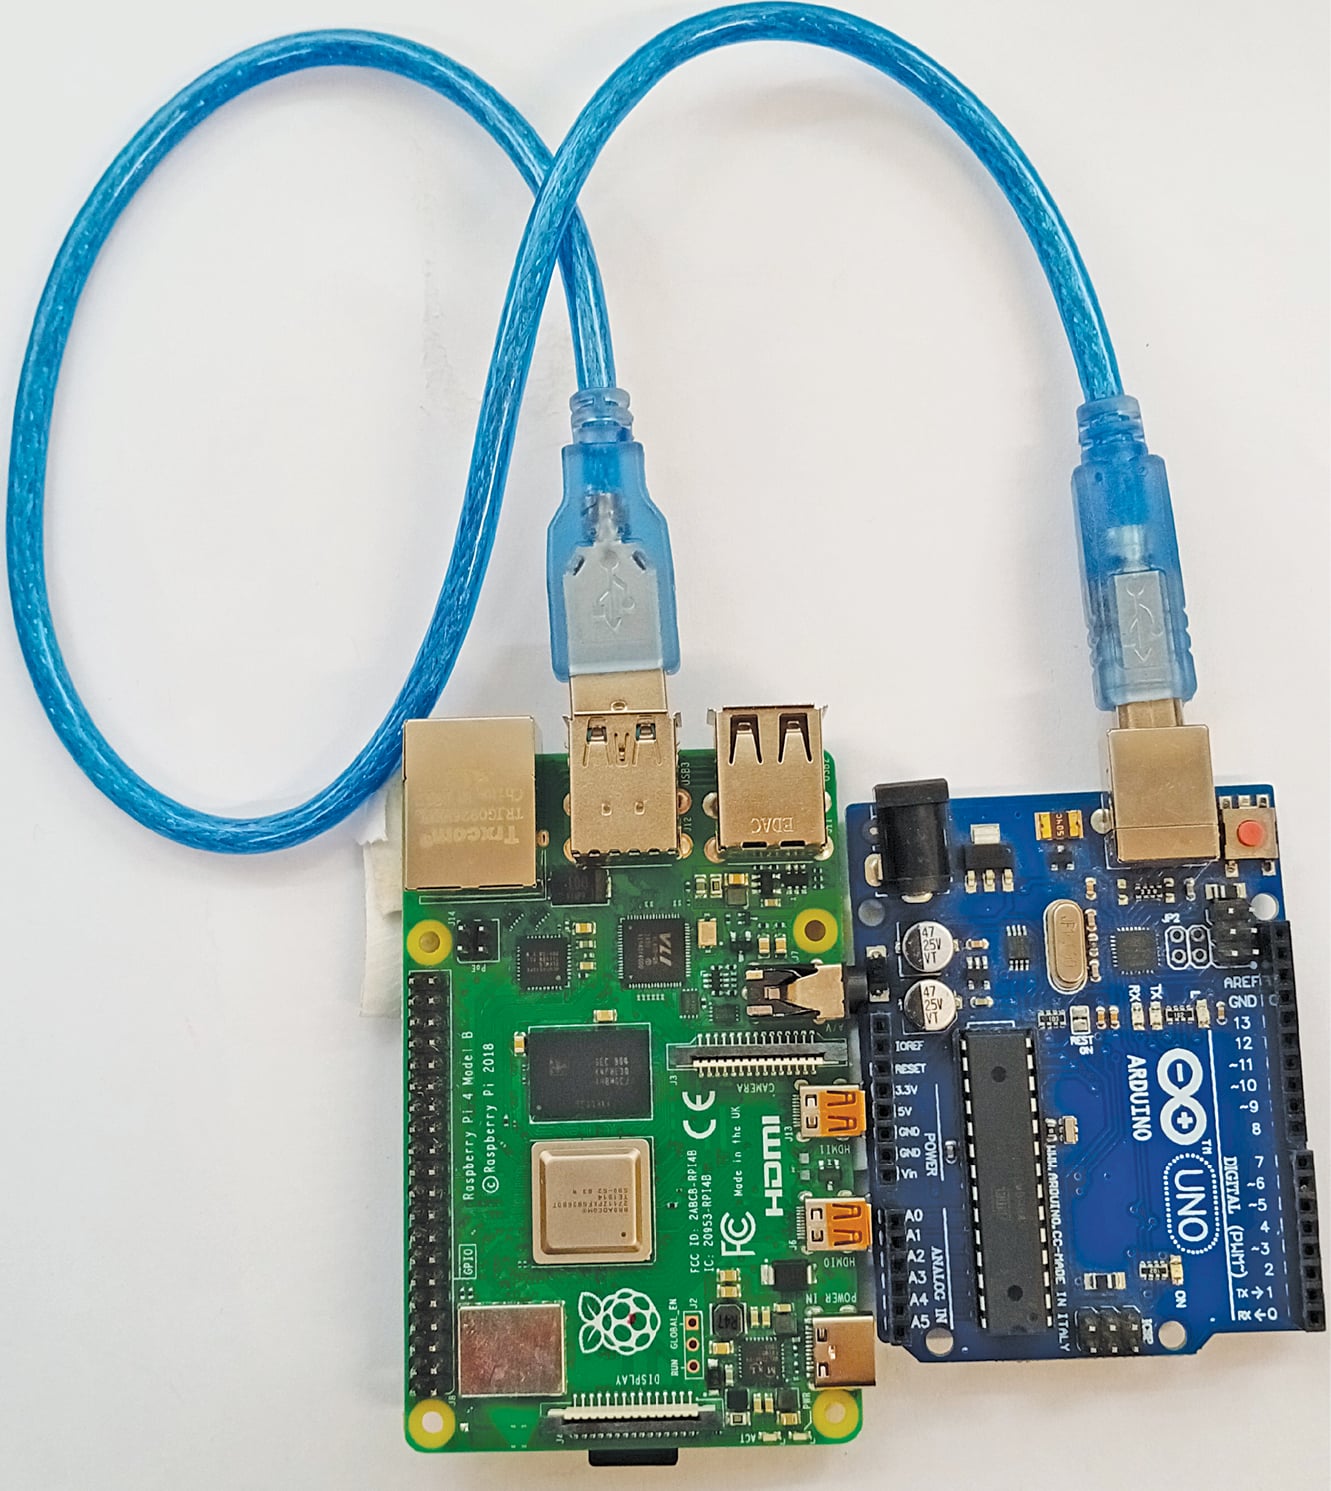 Author prototype of Setting up Arduino as a slave device